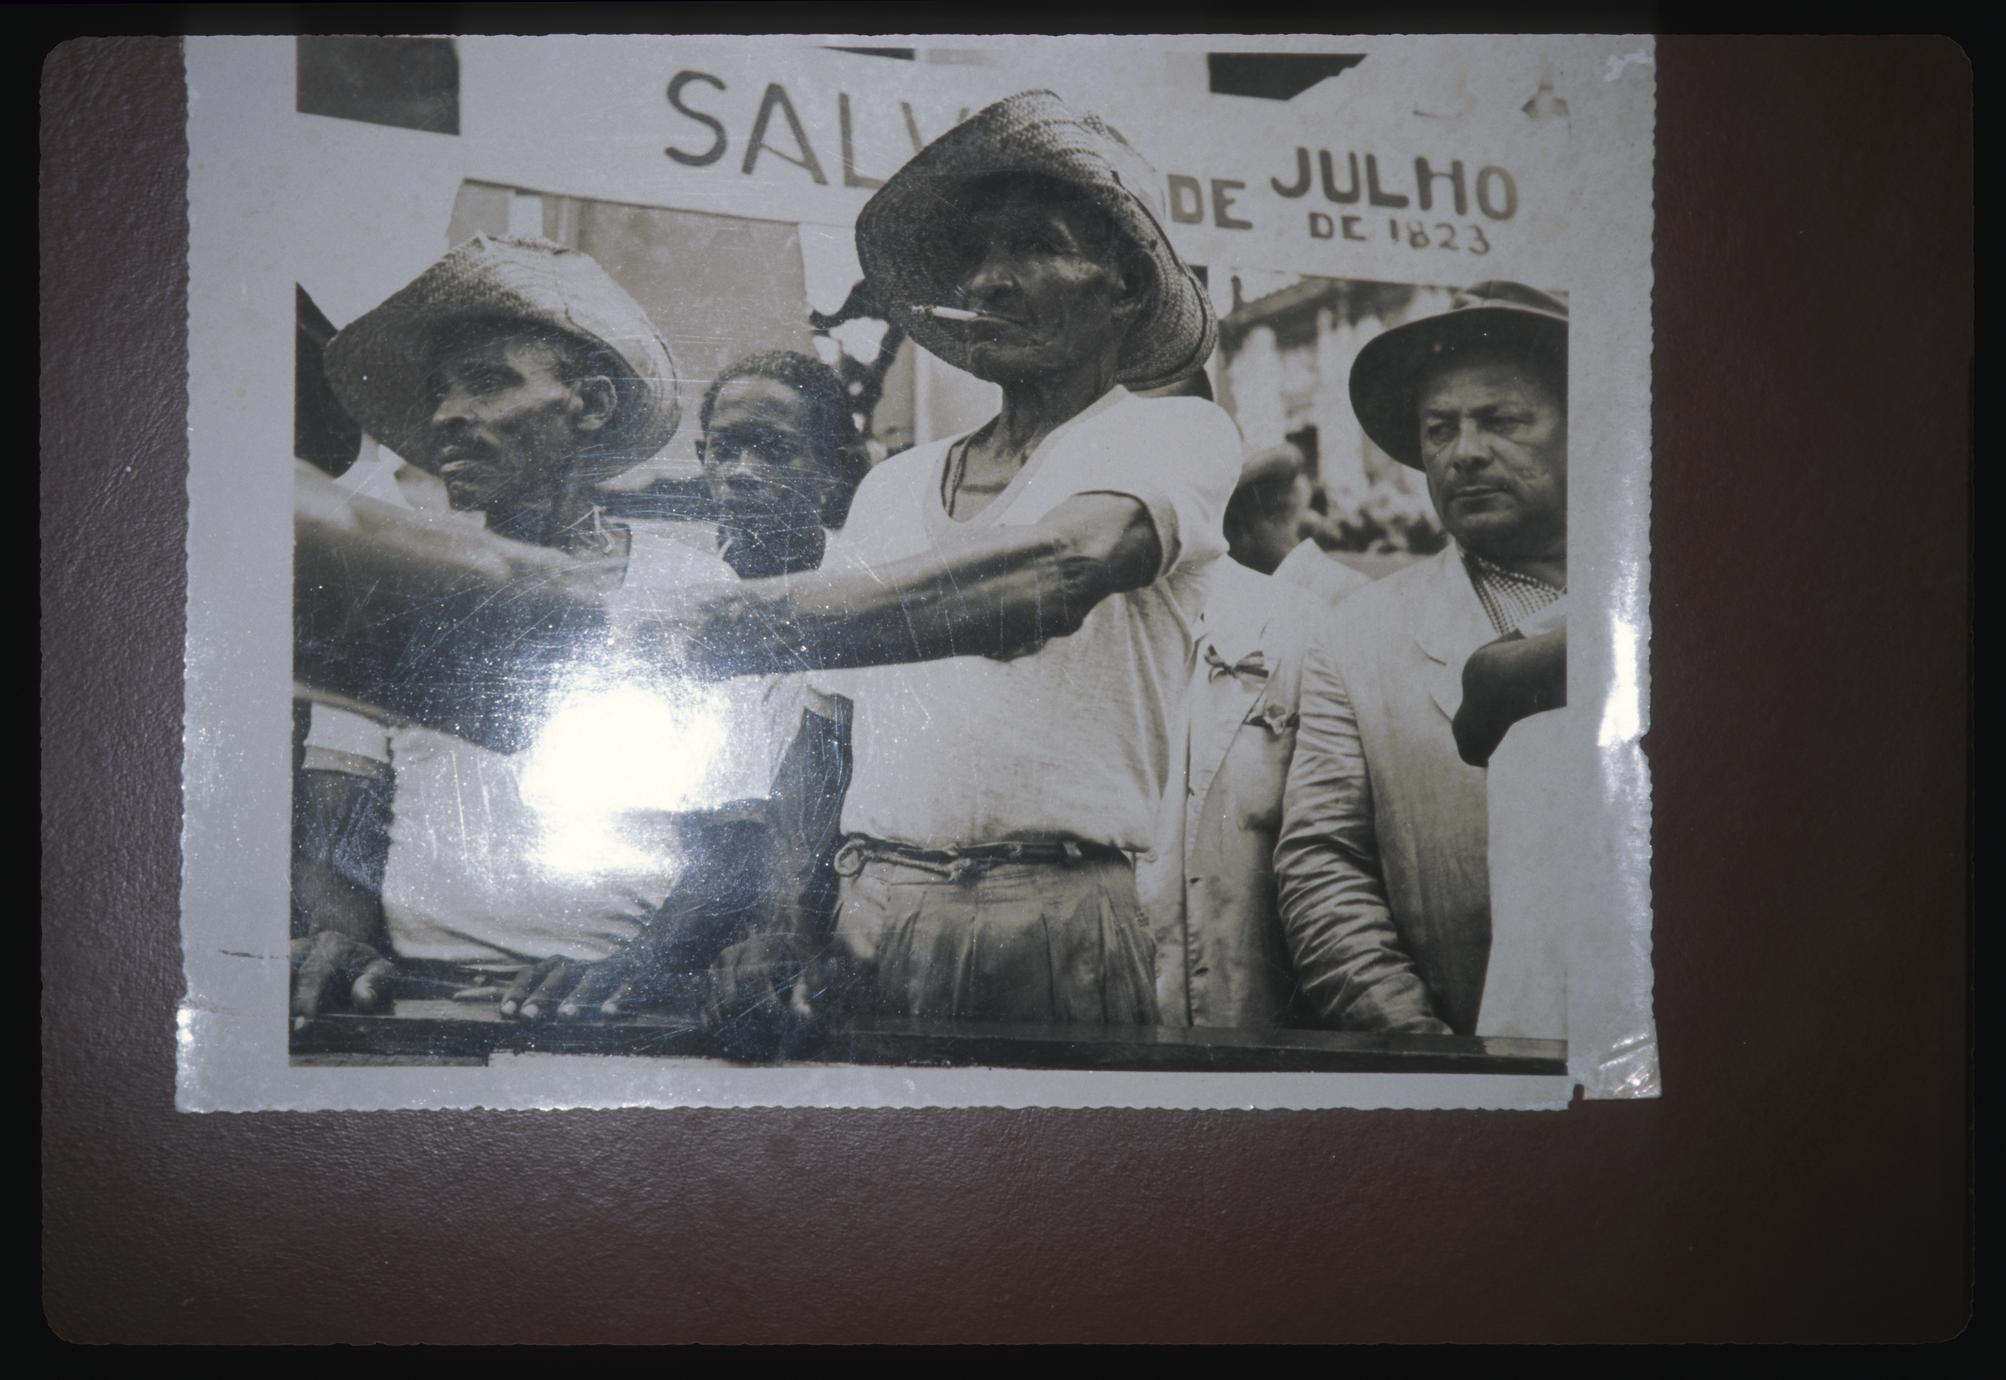 Photograph from the Archive of the Inst. Geo. and Hist. do Bahia (1 of 9)